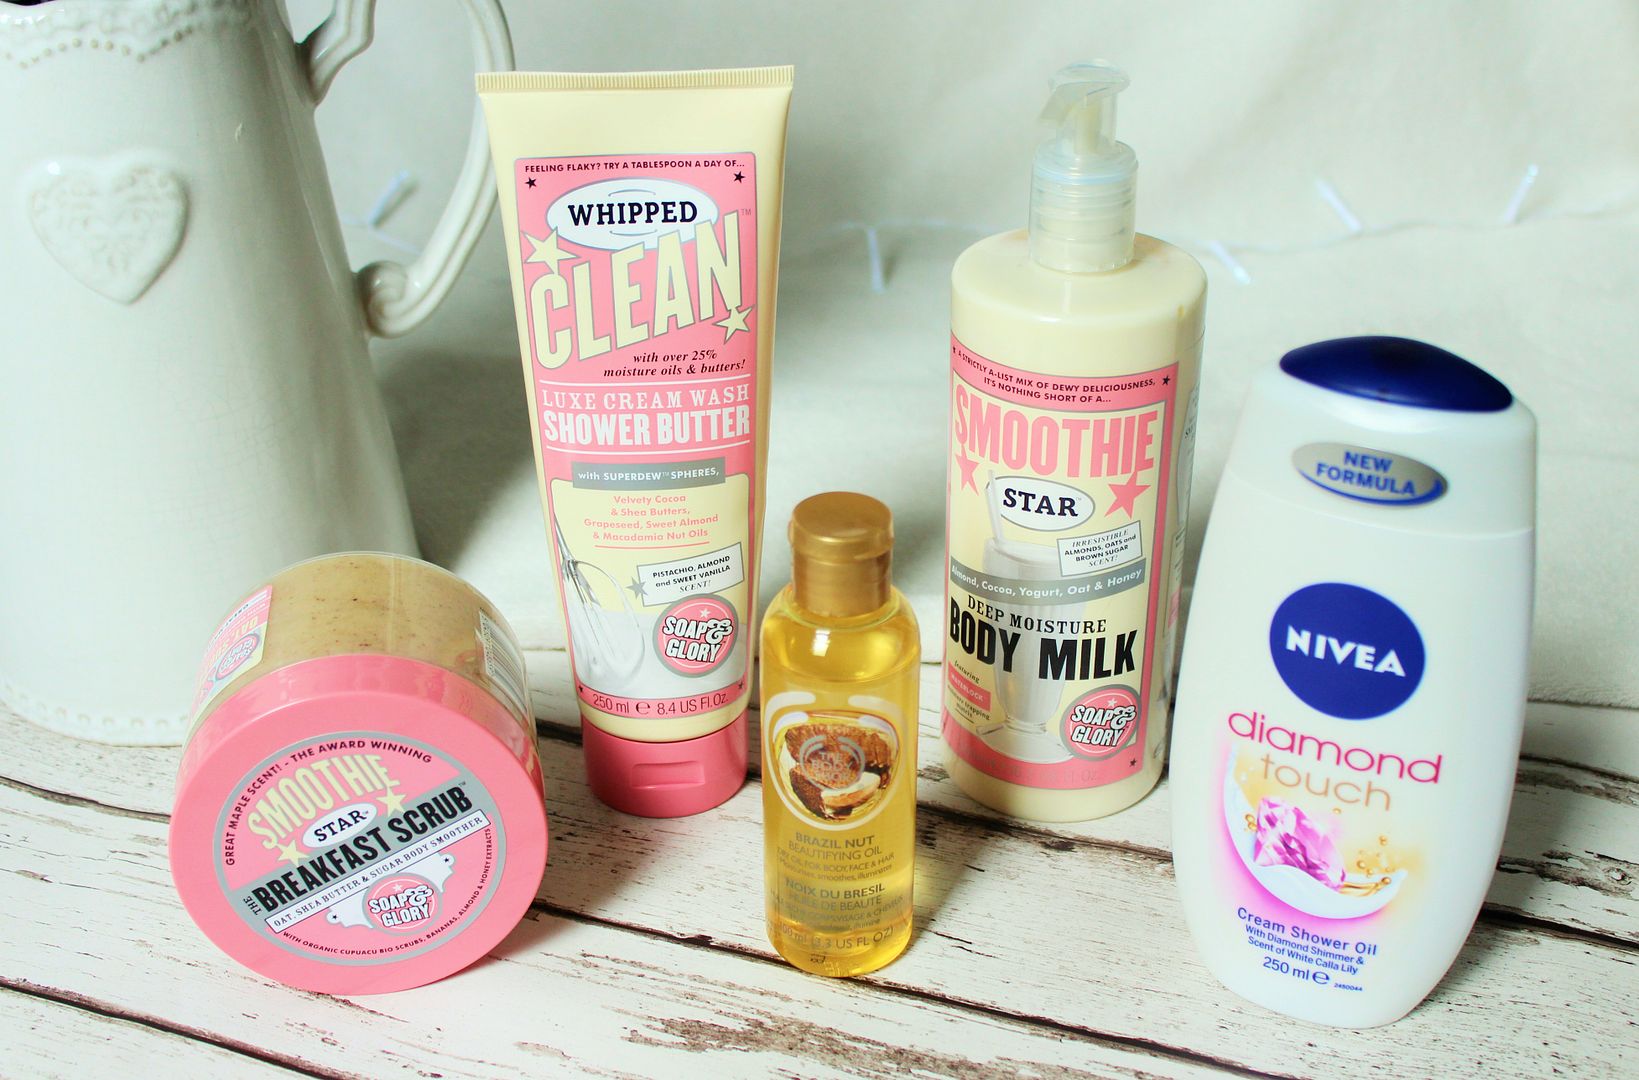 Summer-Read-Skin-Body-Care-Soap-And-Glory-The-Body-Shop-Nivea-Belle-Amie-UK-Beauty-Fashion-Lifestyle-Blog